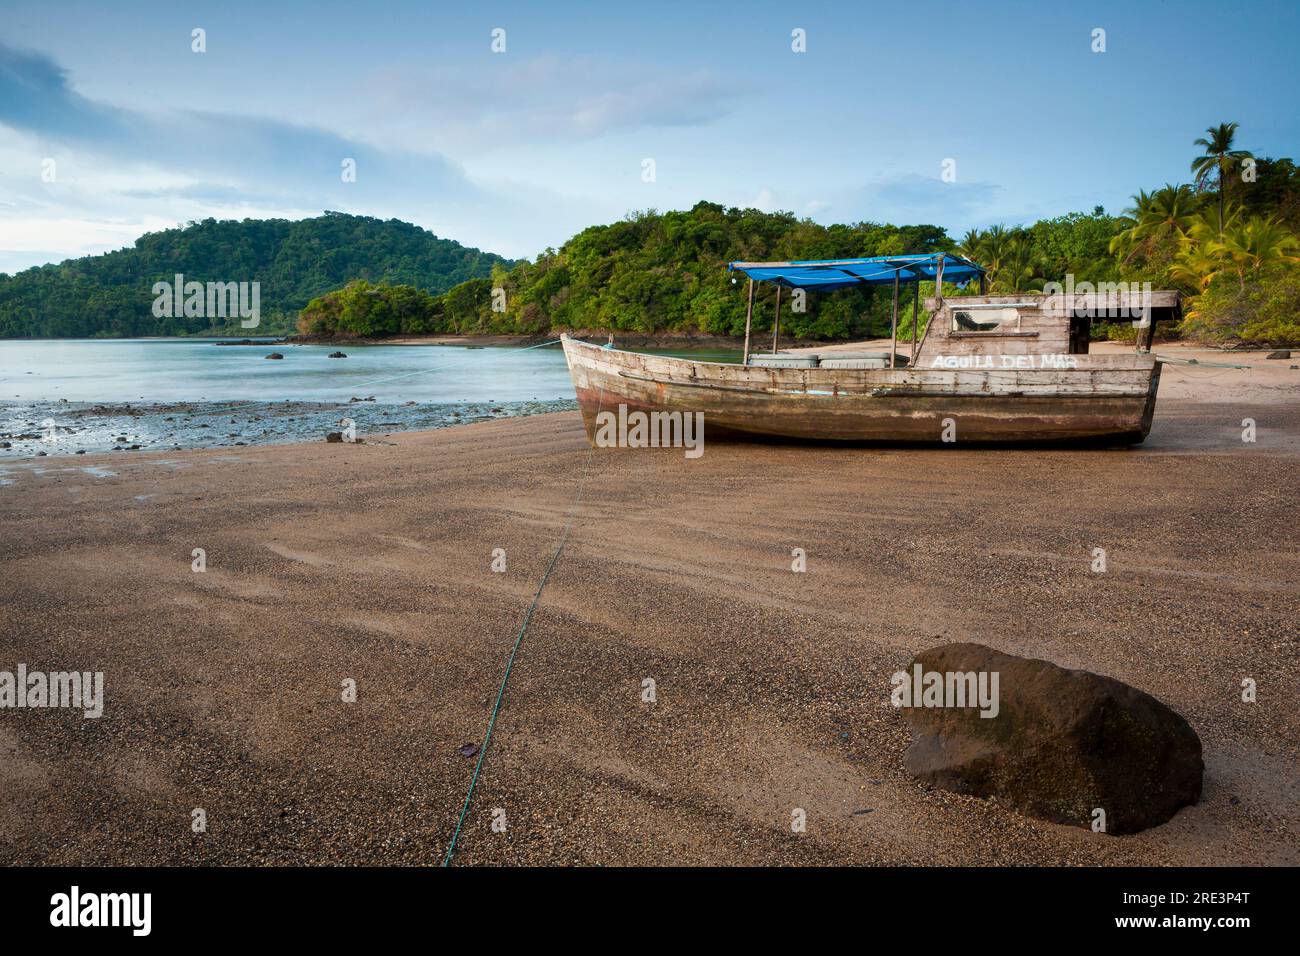 Fishing boat on the beach at low tide at Coiba Island, Pacific coast, Veraguas province, Republic of Panama, Central America. Stock Photo